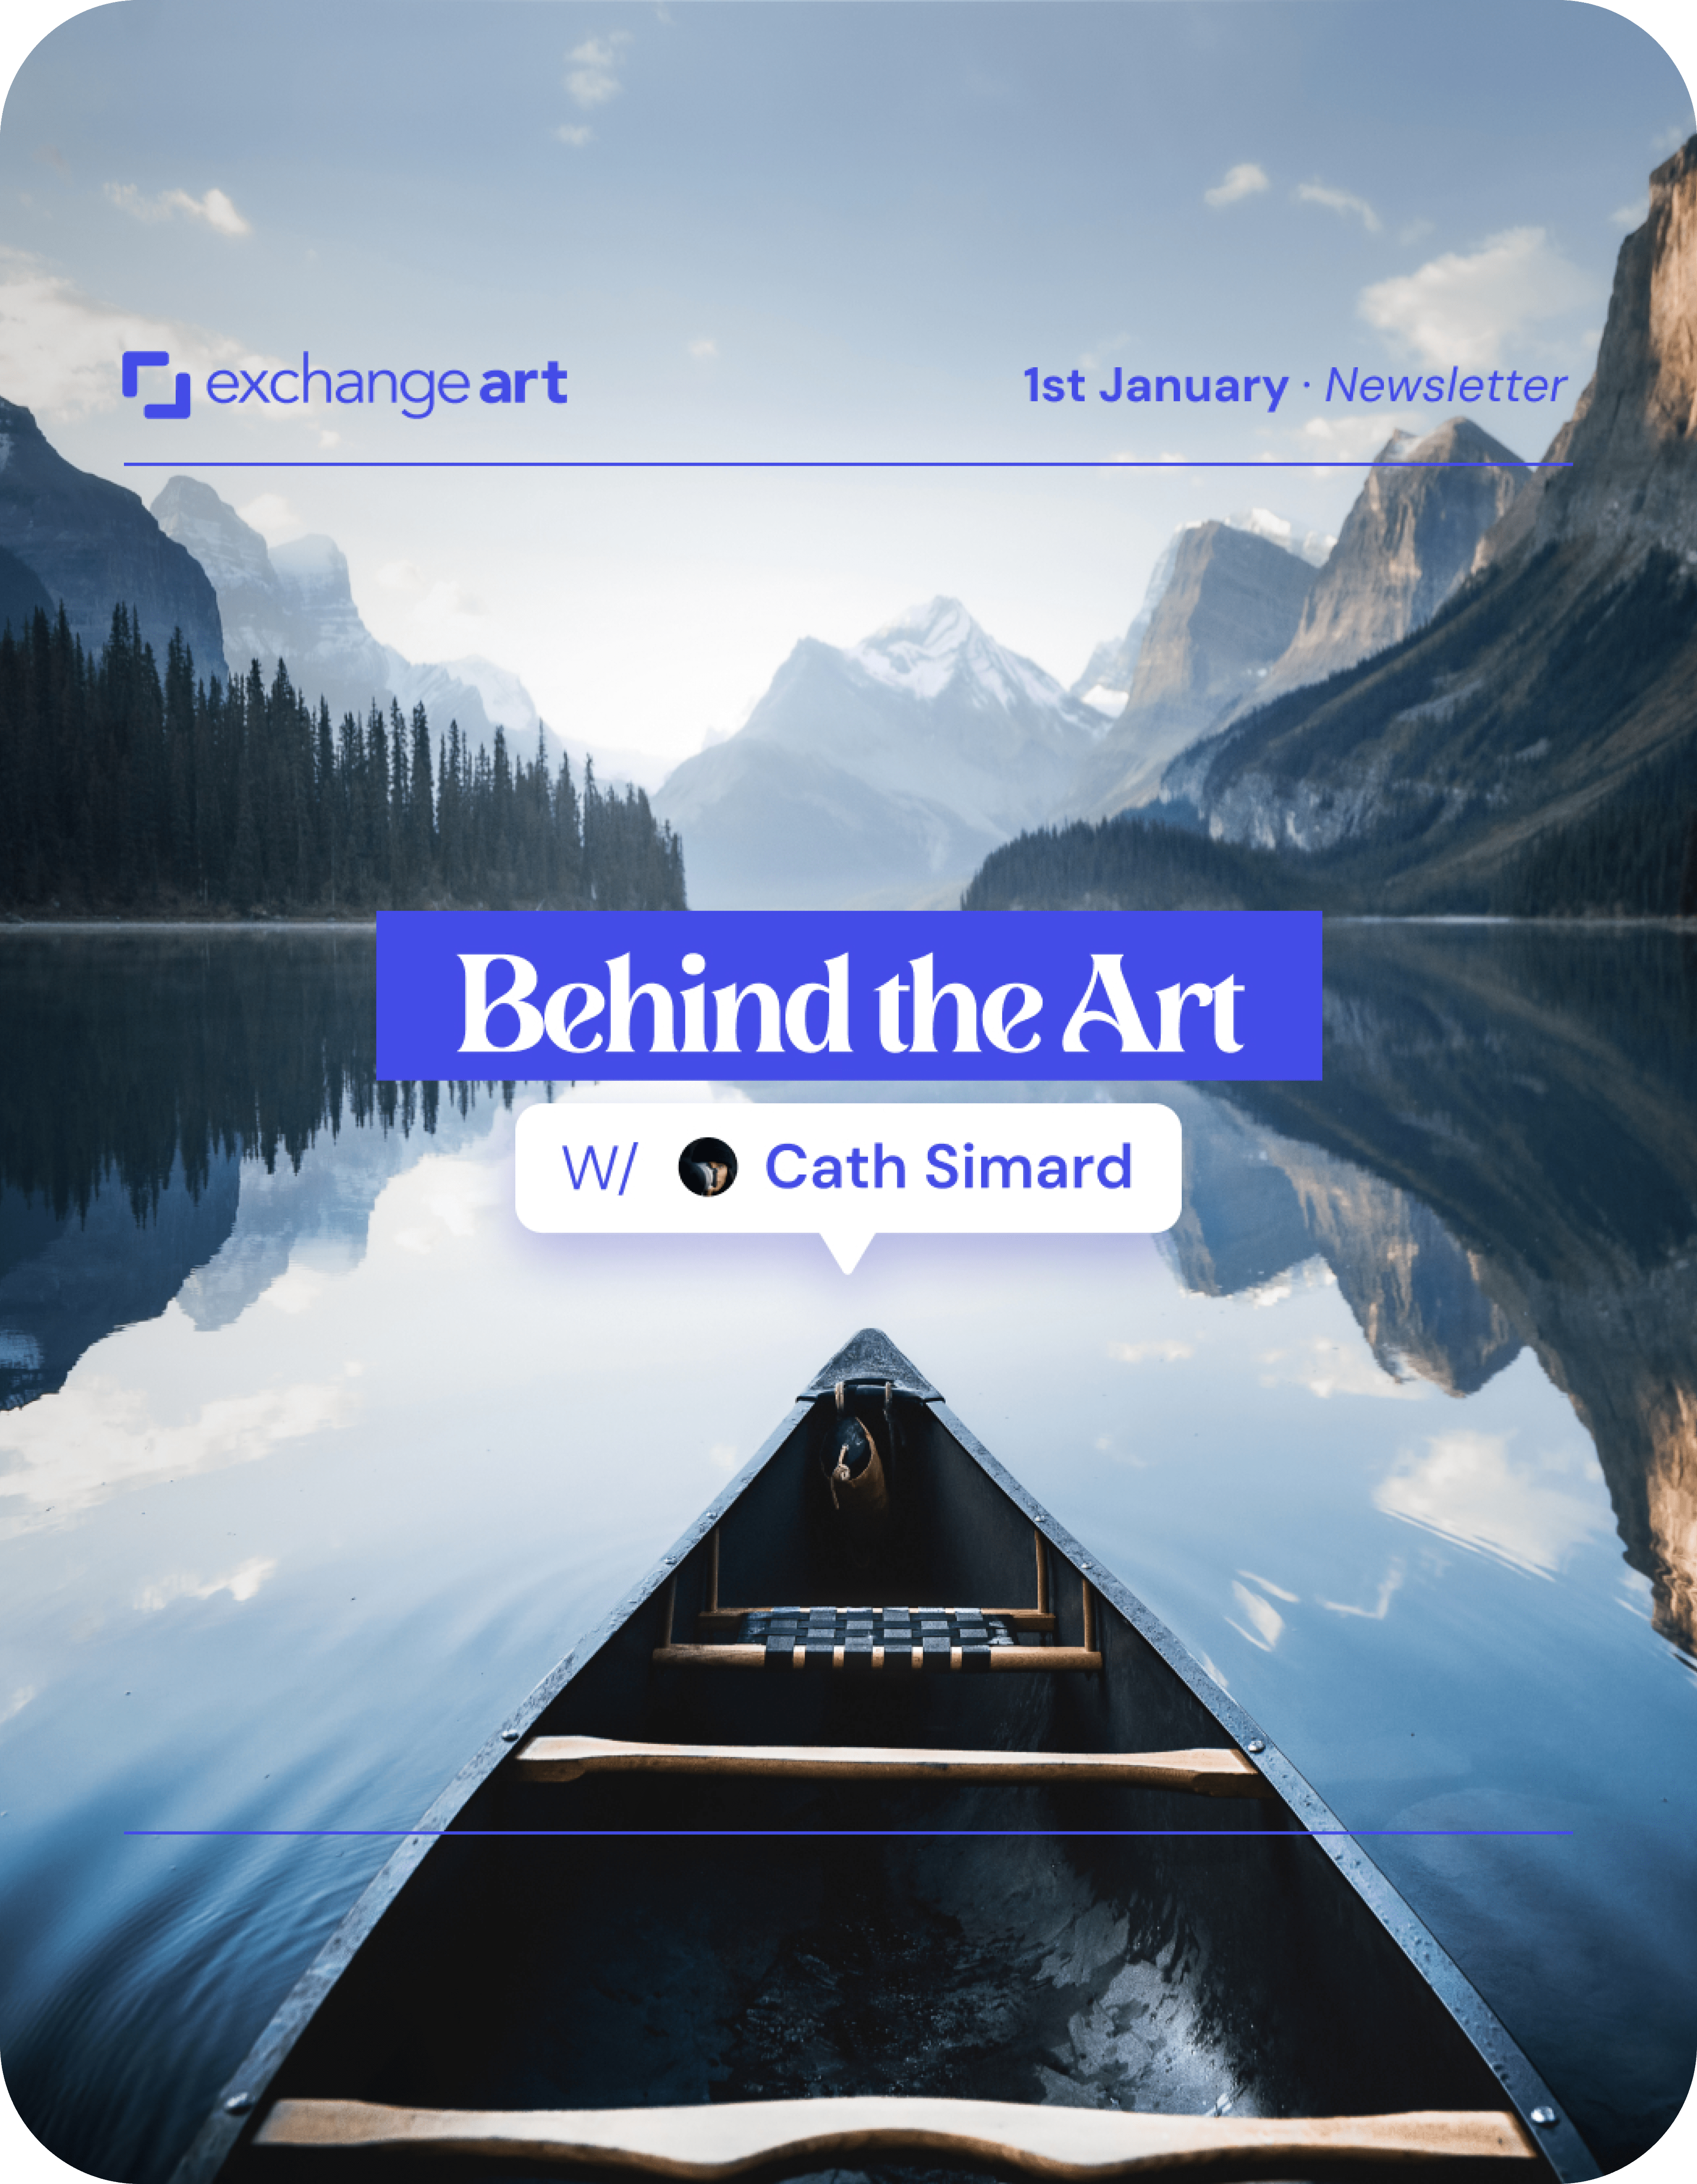 Behind the Art with Cath Simard